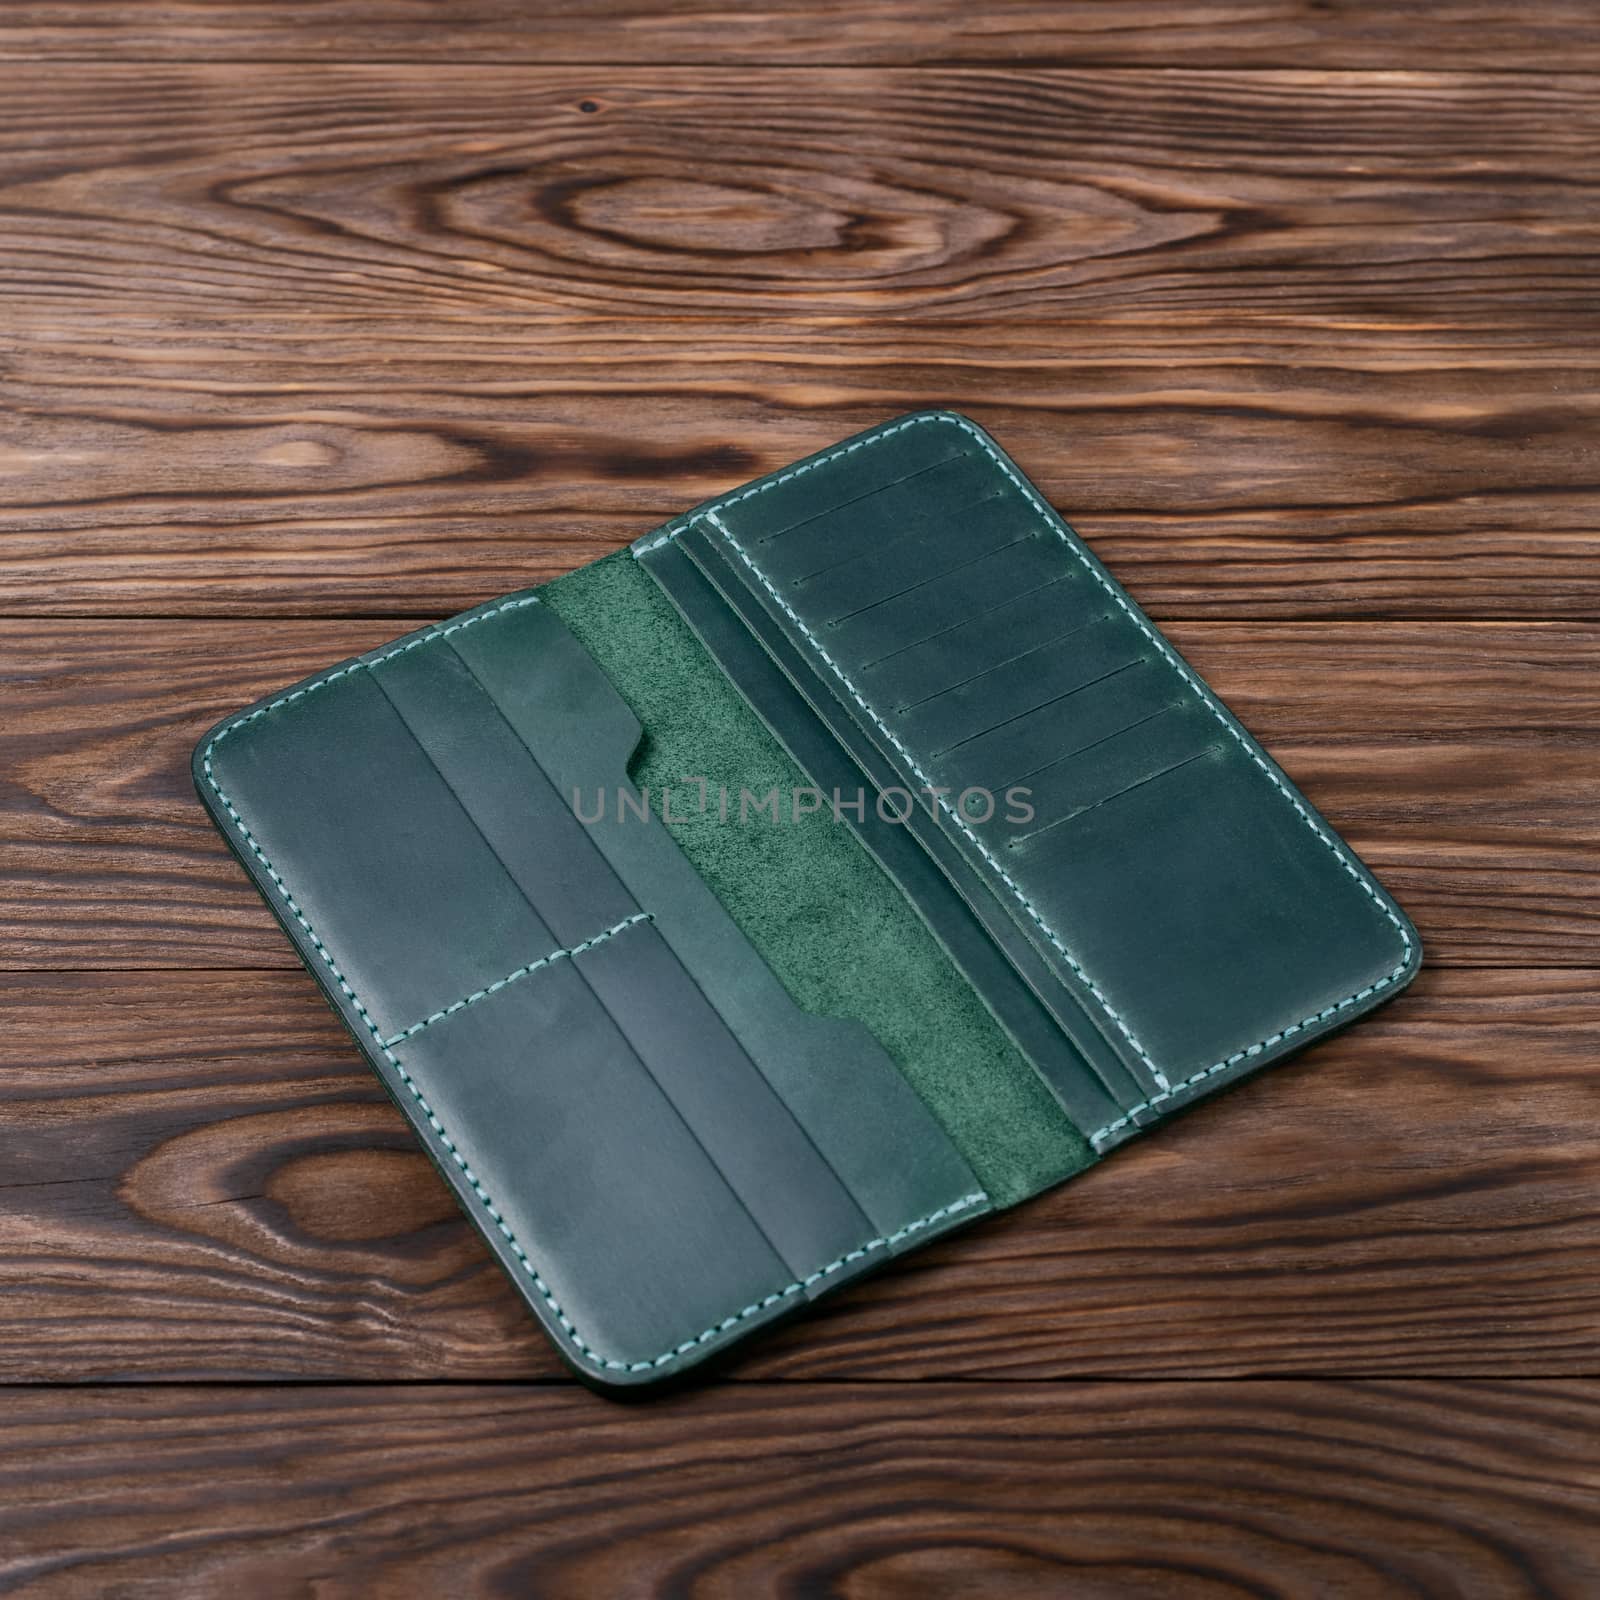 Green color handmade leather porte-monnaie on wooden textured background. Purse is opened and empty. Side view. Stock photo of luxury accessories.